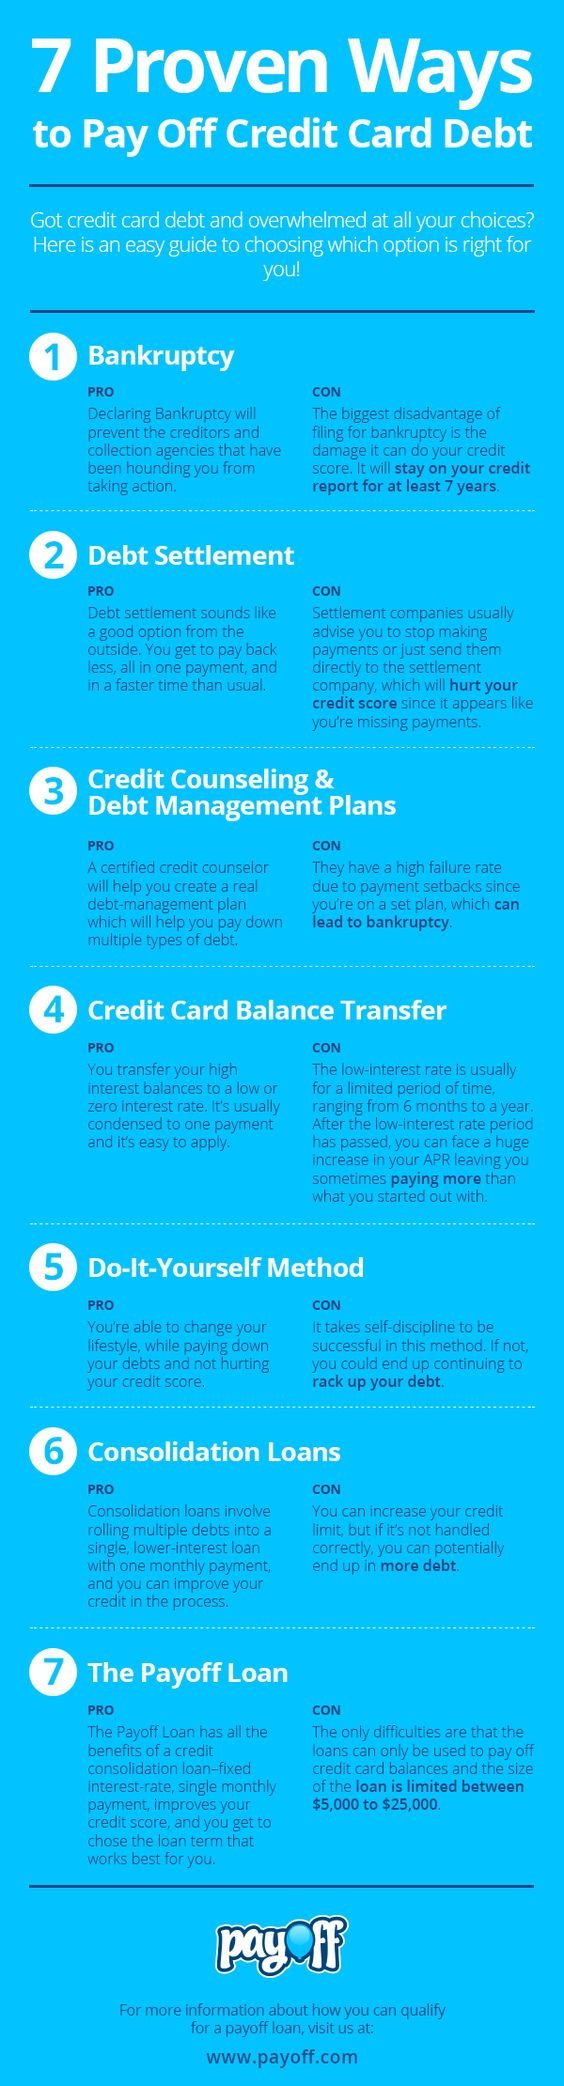 7 proven ways to pay off credit card debt